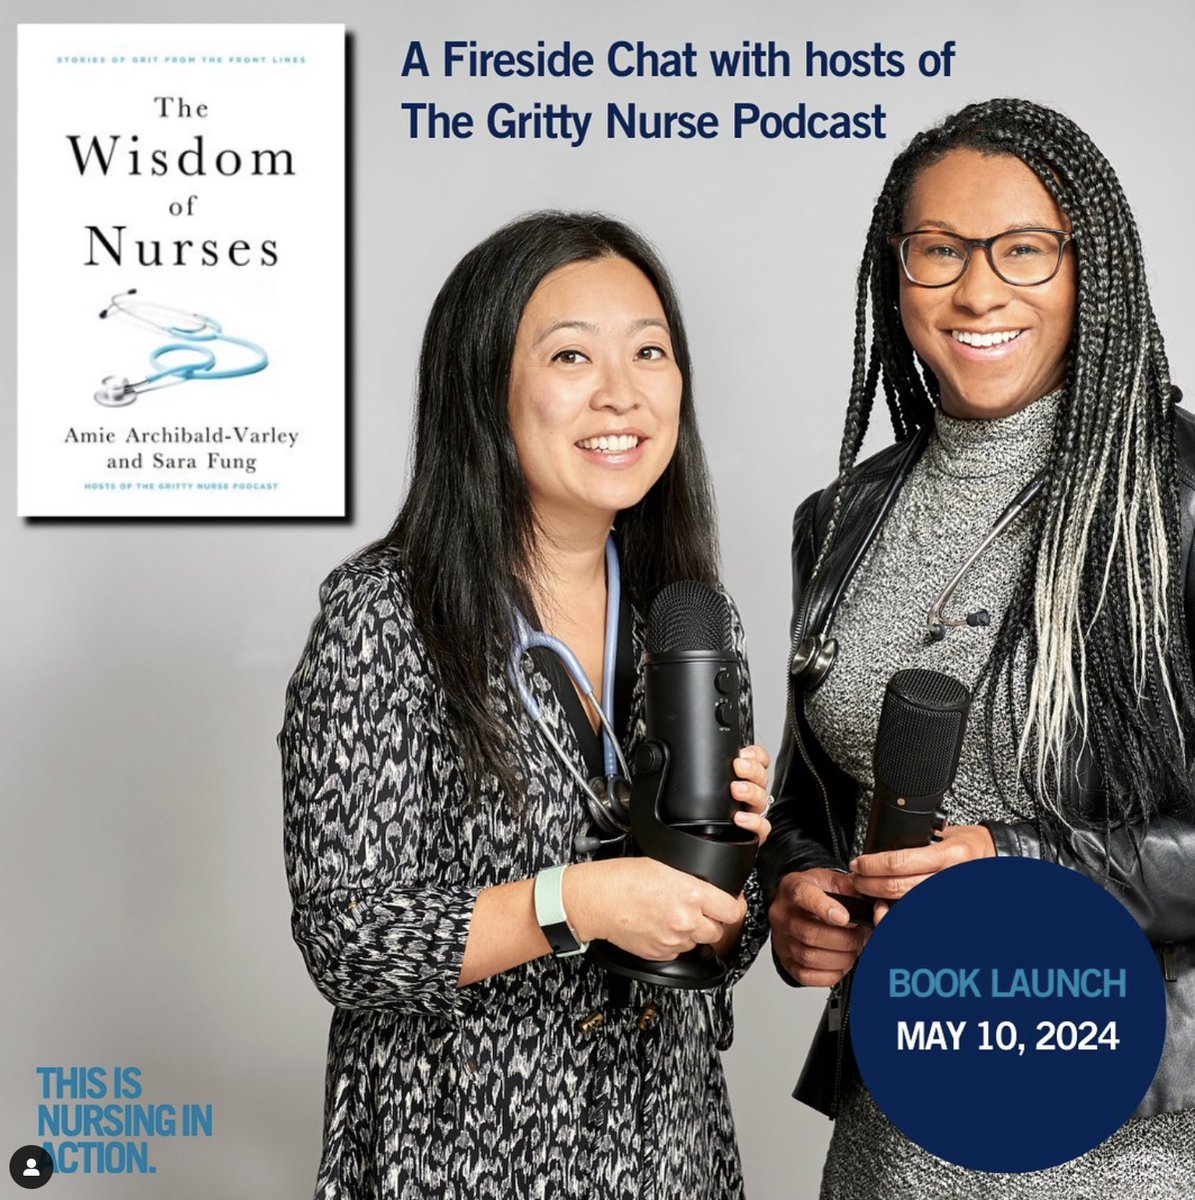 What are we up to tonight for National Nursing Week??Join us at @UofT @UofTNursing for a fireside chat about our #1 National Best Selling Book, The Wisdom of Nurses! See you all soon! @AmieVarley @saramfung @HarperCollinsCa @NSB_Speakers